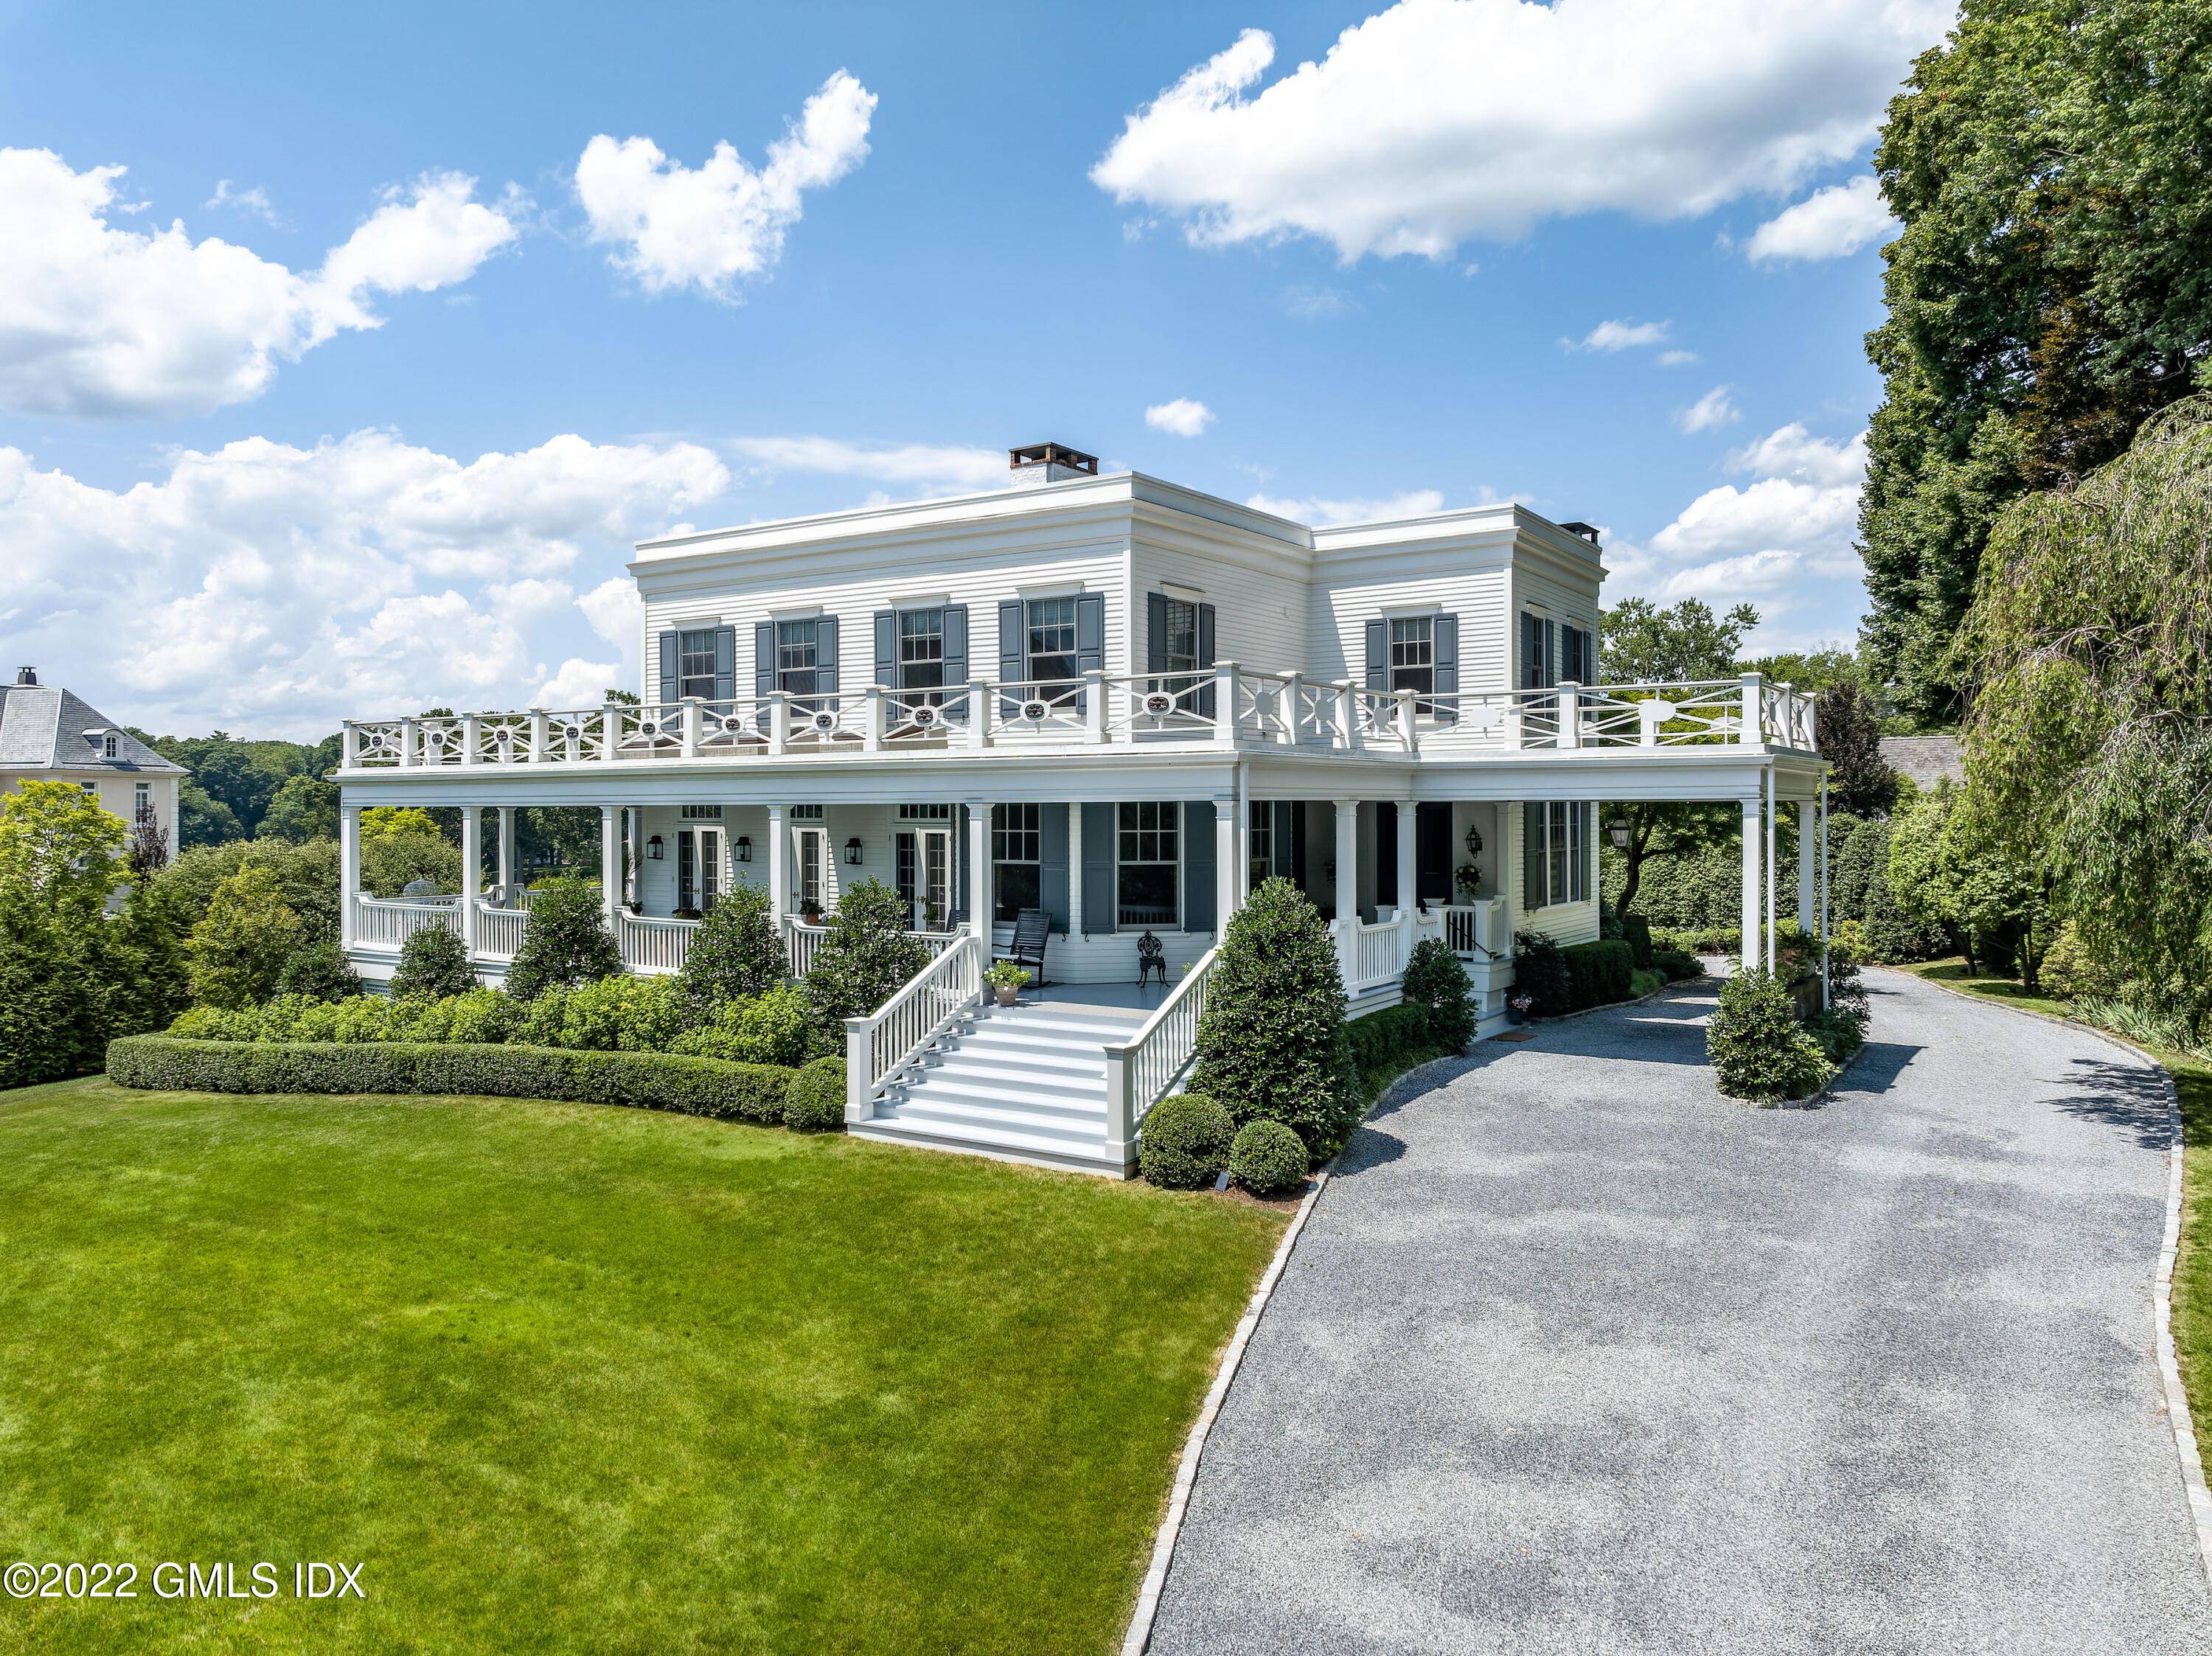 In the heart of the Belle Haven Association, a traditional Federal Colonial Revival is situated on a secluded lane with water views over Byram Harbor.